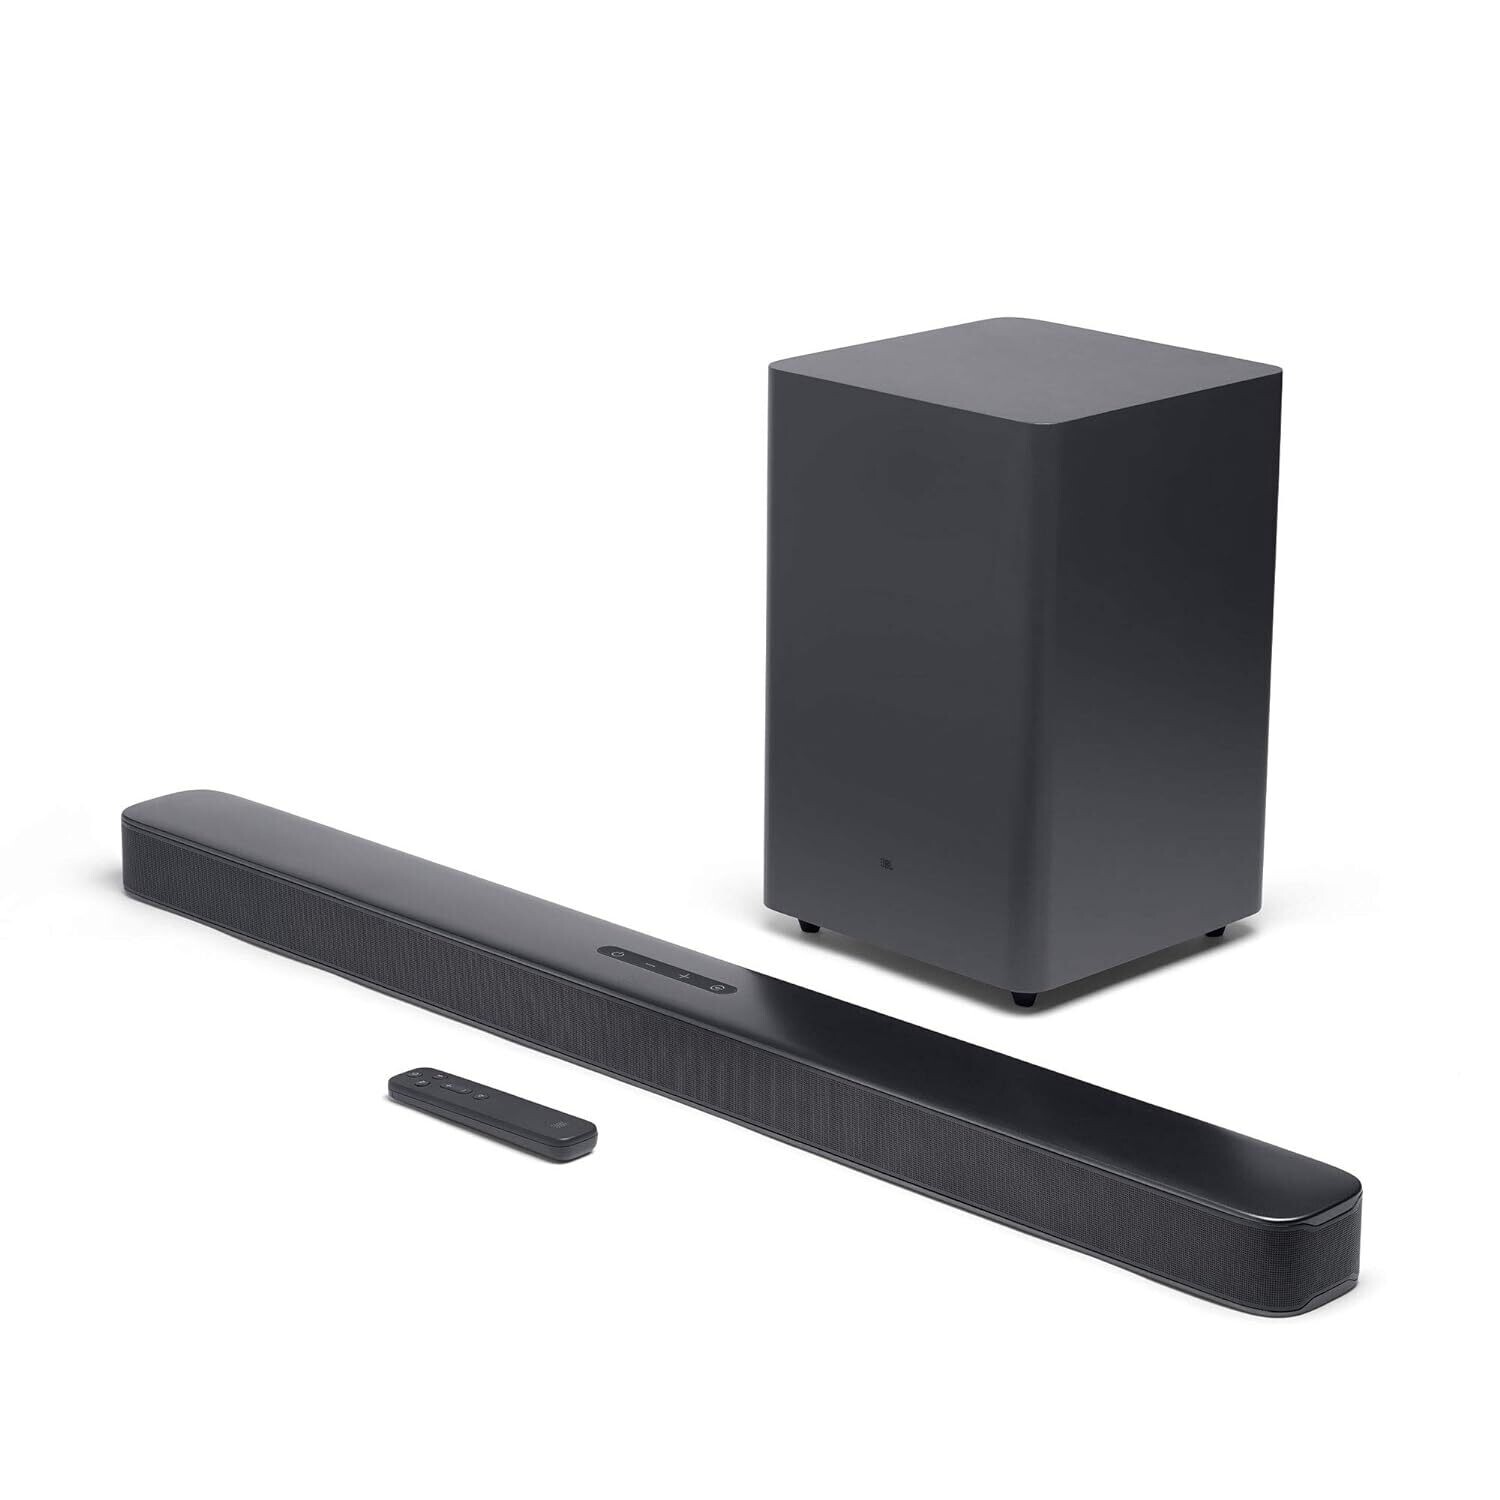 JBL Bar 2.1 Deep Bass, Dolby Digital Soundbar with Wireless Subwoofer for Extra Deep Bass, 2.1 Channel Home Theatre with Remote, Surround Sound, HDMI ARC, Bluetooth & Optical Connectivity (300W)